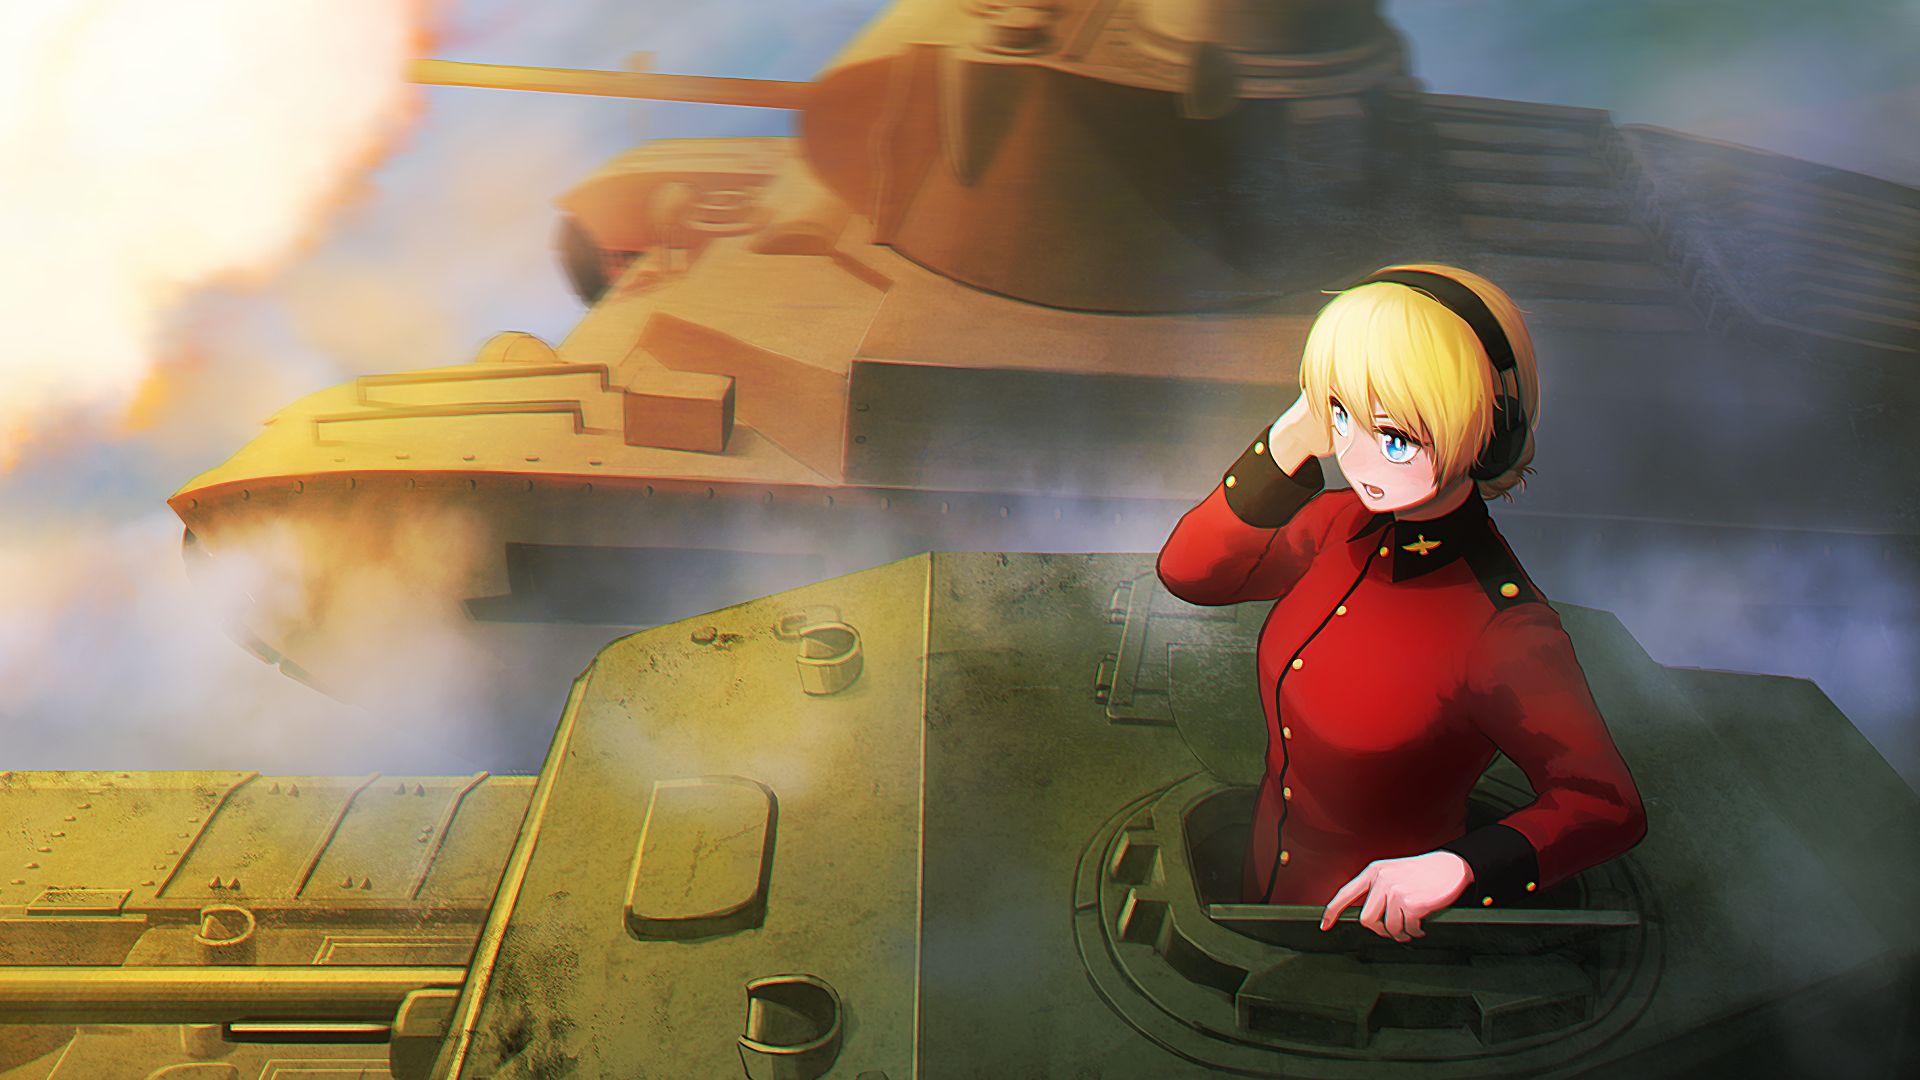 Girls Und Panzer wallpapers for desktop, download free Girls Und Panzer  pictures and backgrounds for PC 